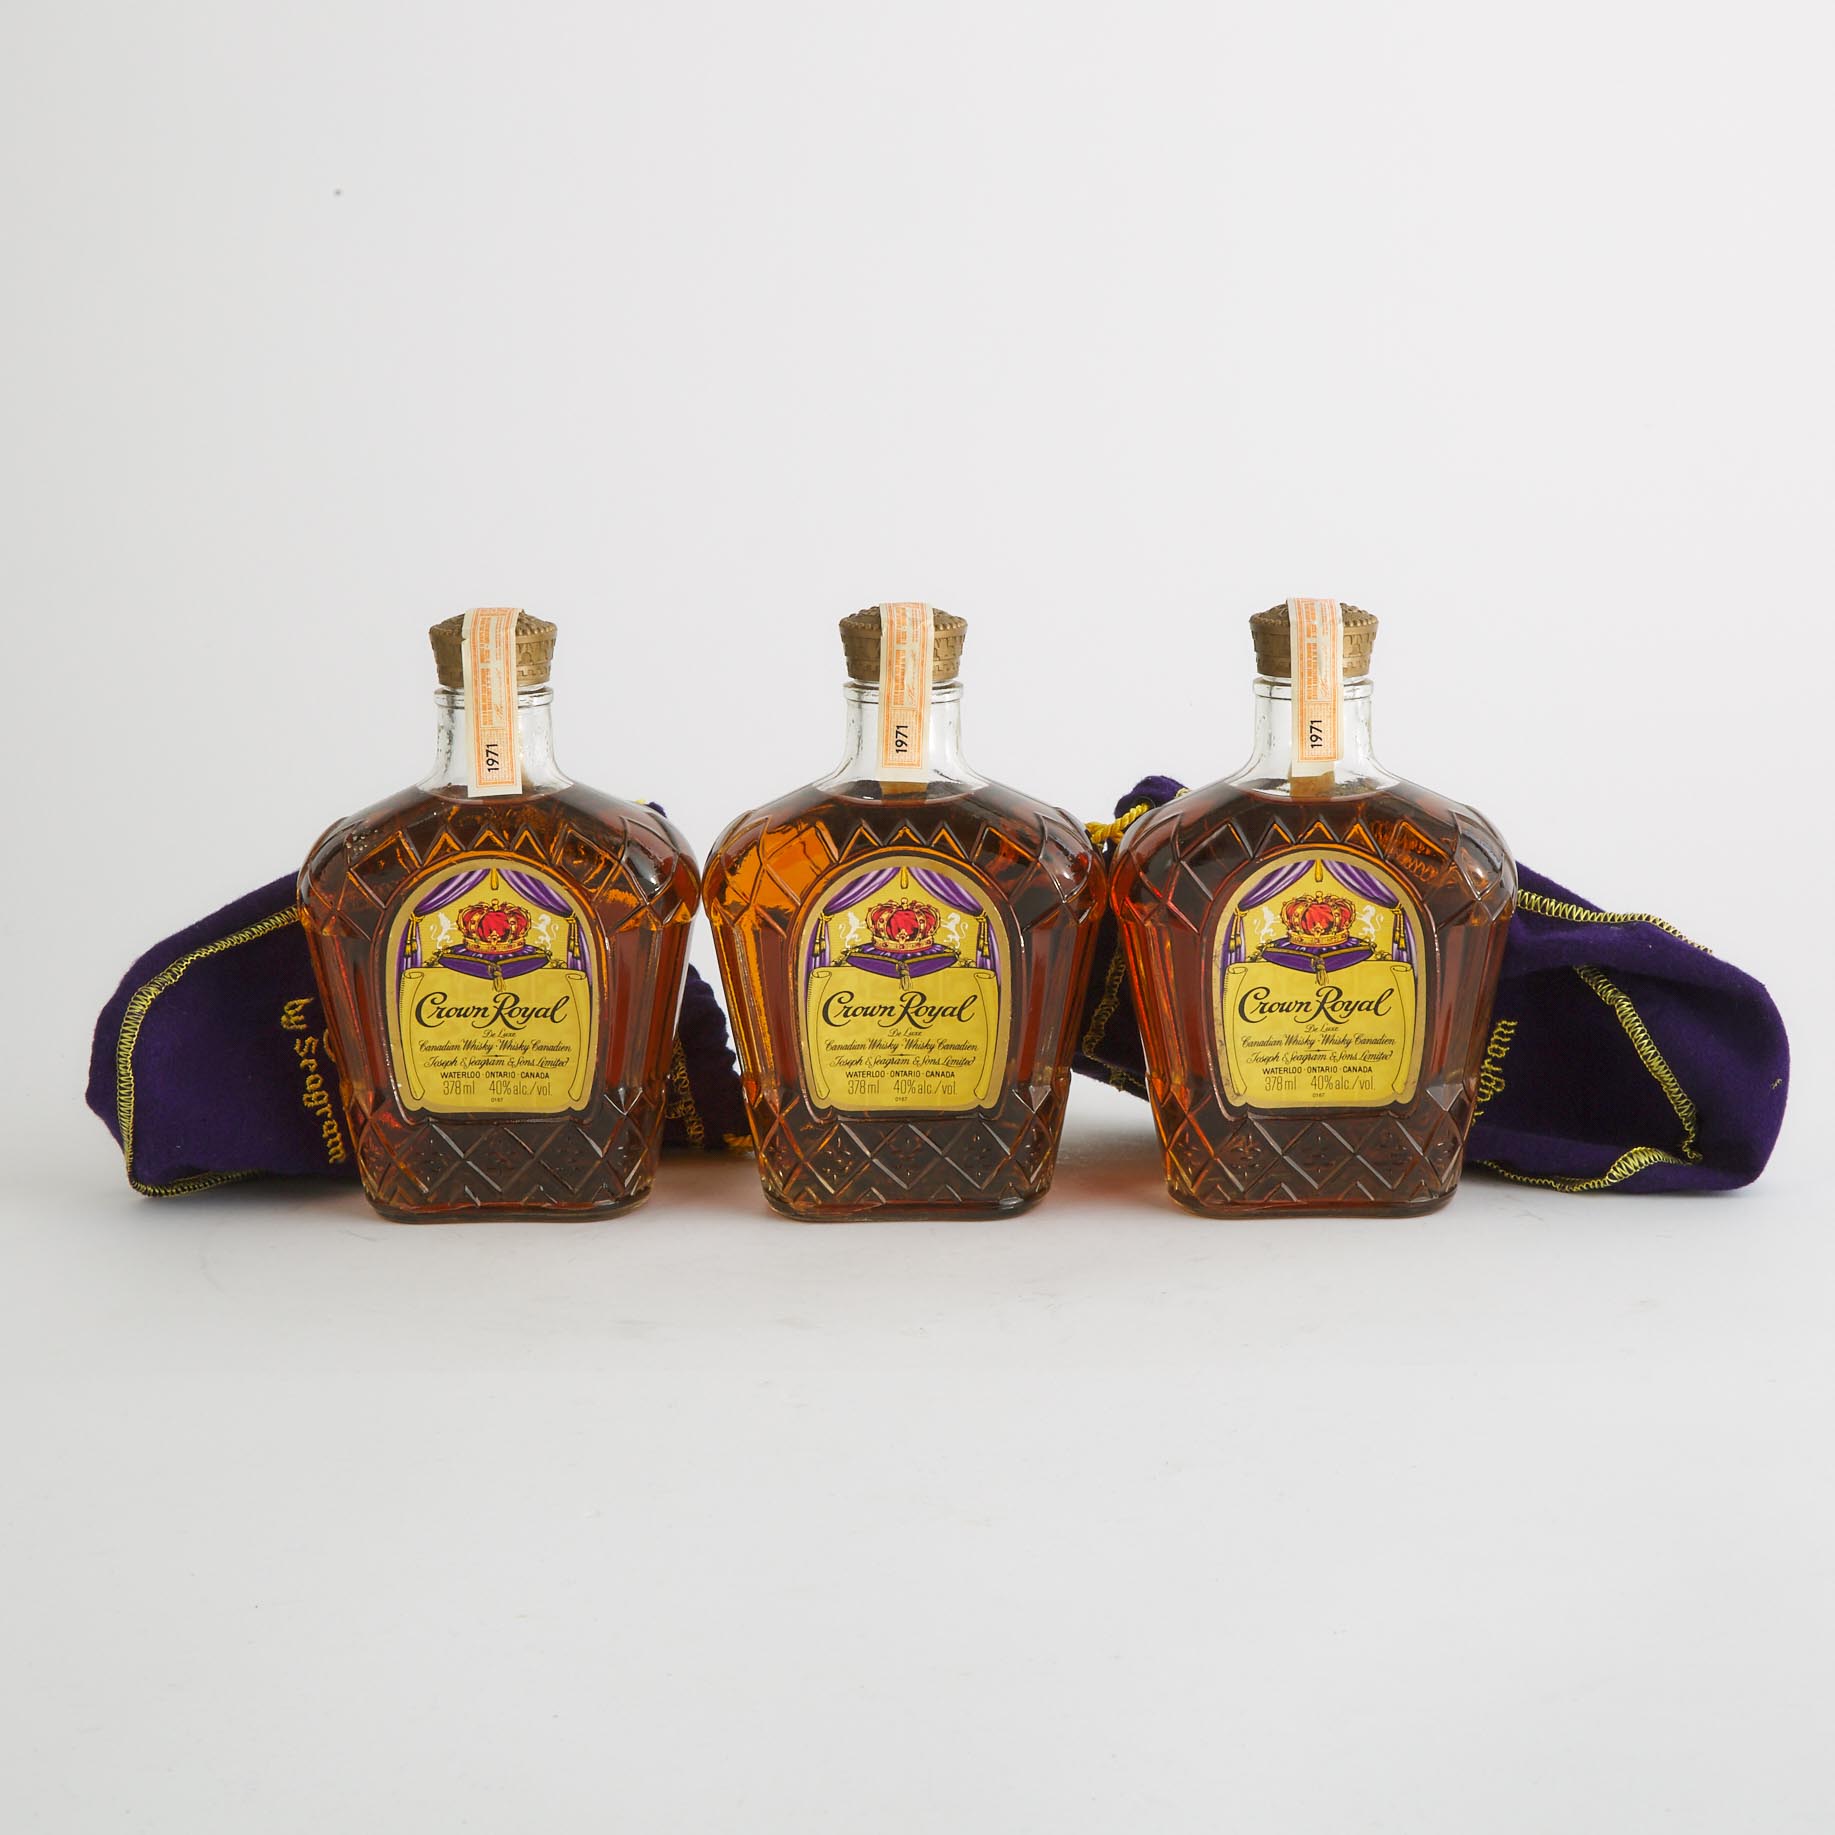 CROWN ROYAL BLENDED CANADIAN WHISKY NAS (THREE 378 ML)